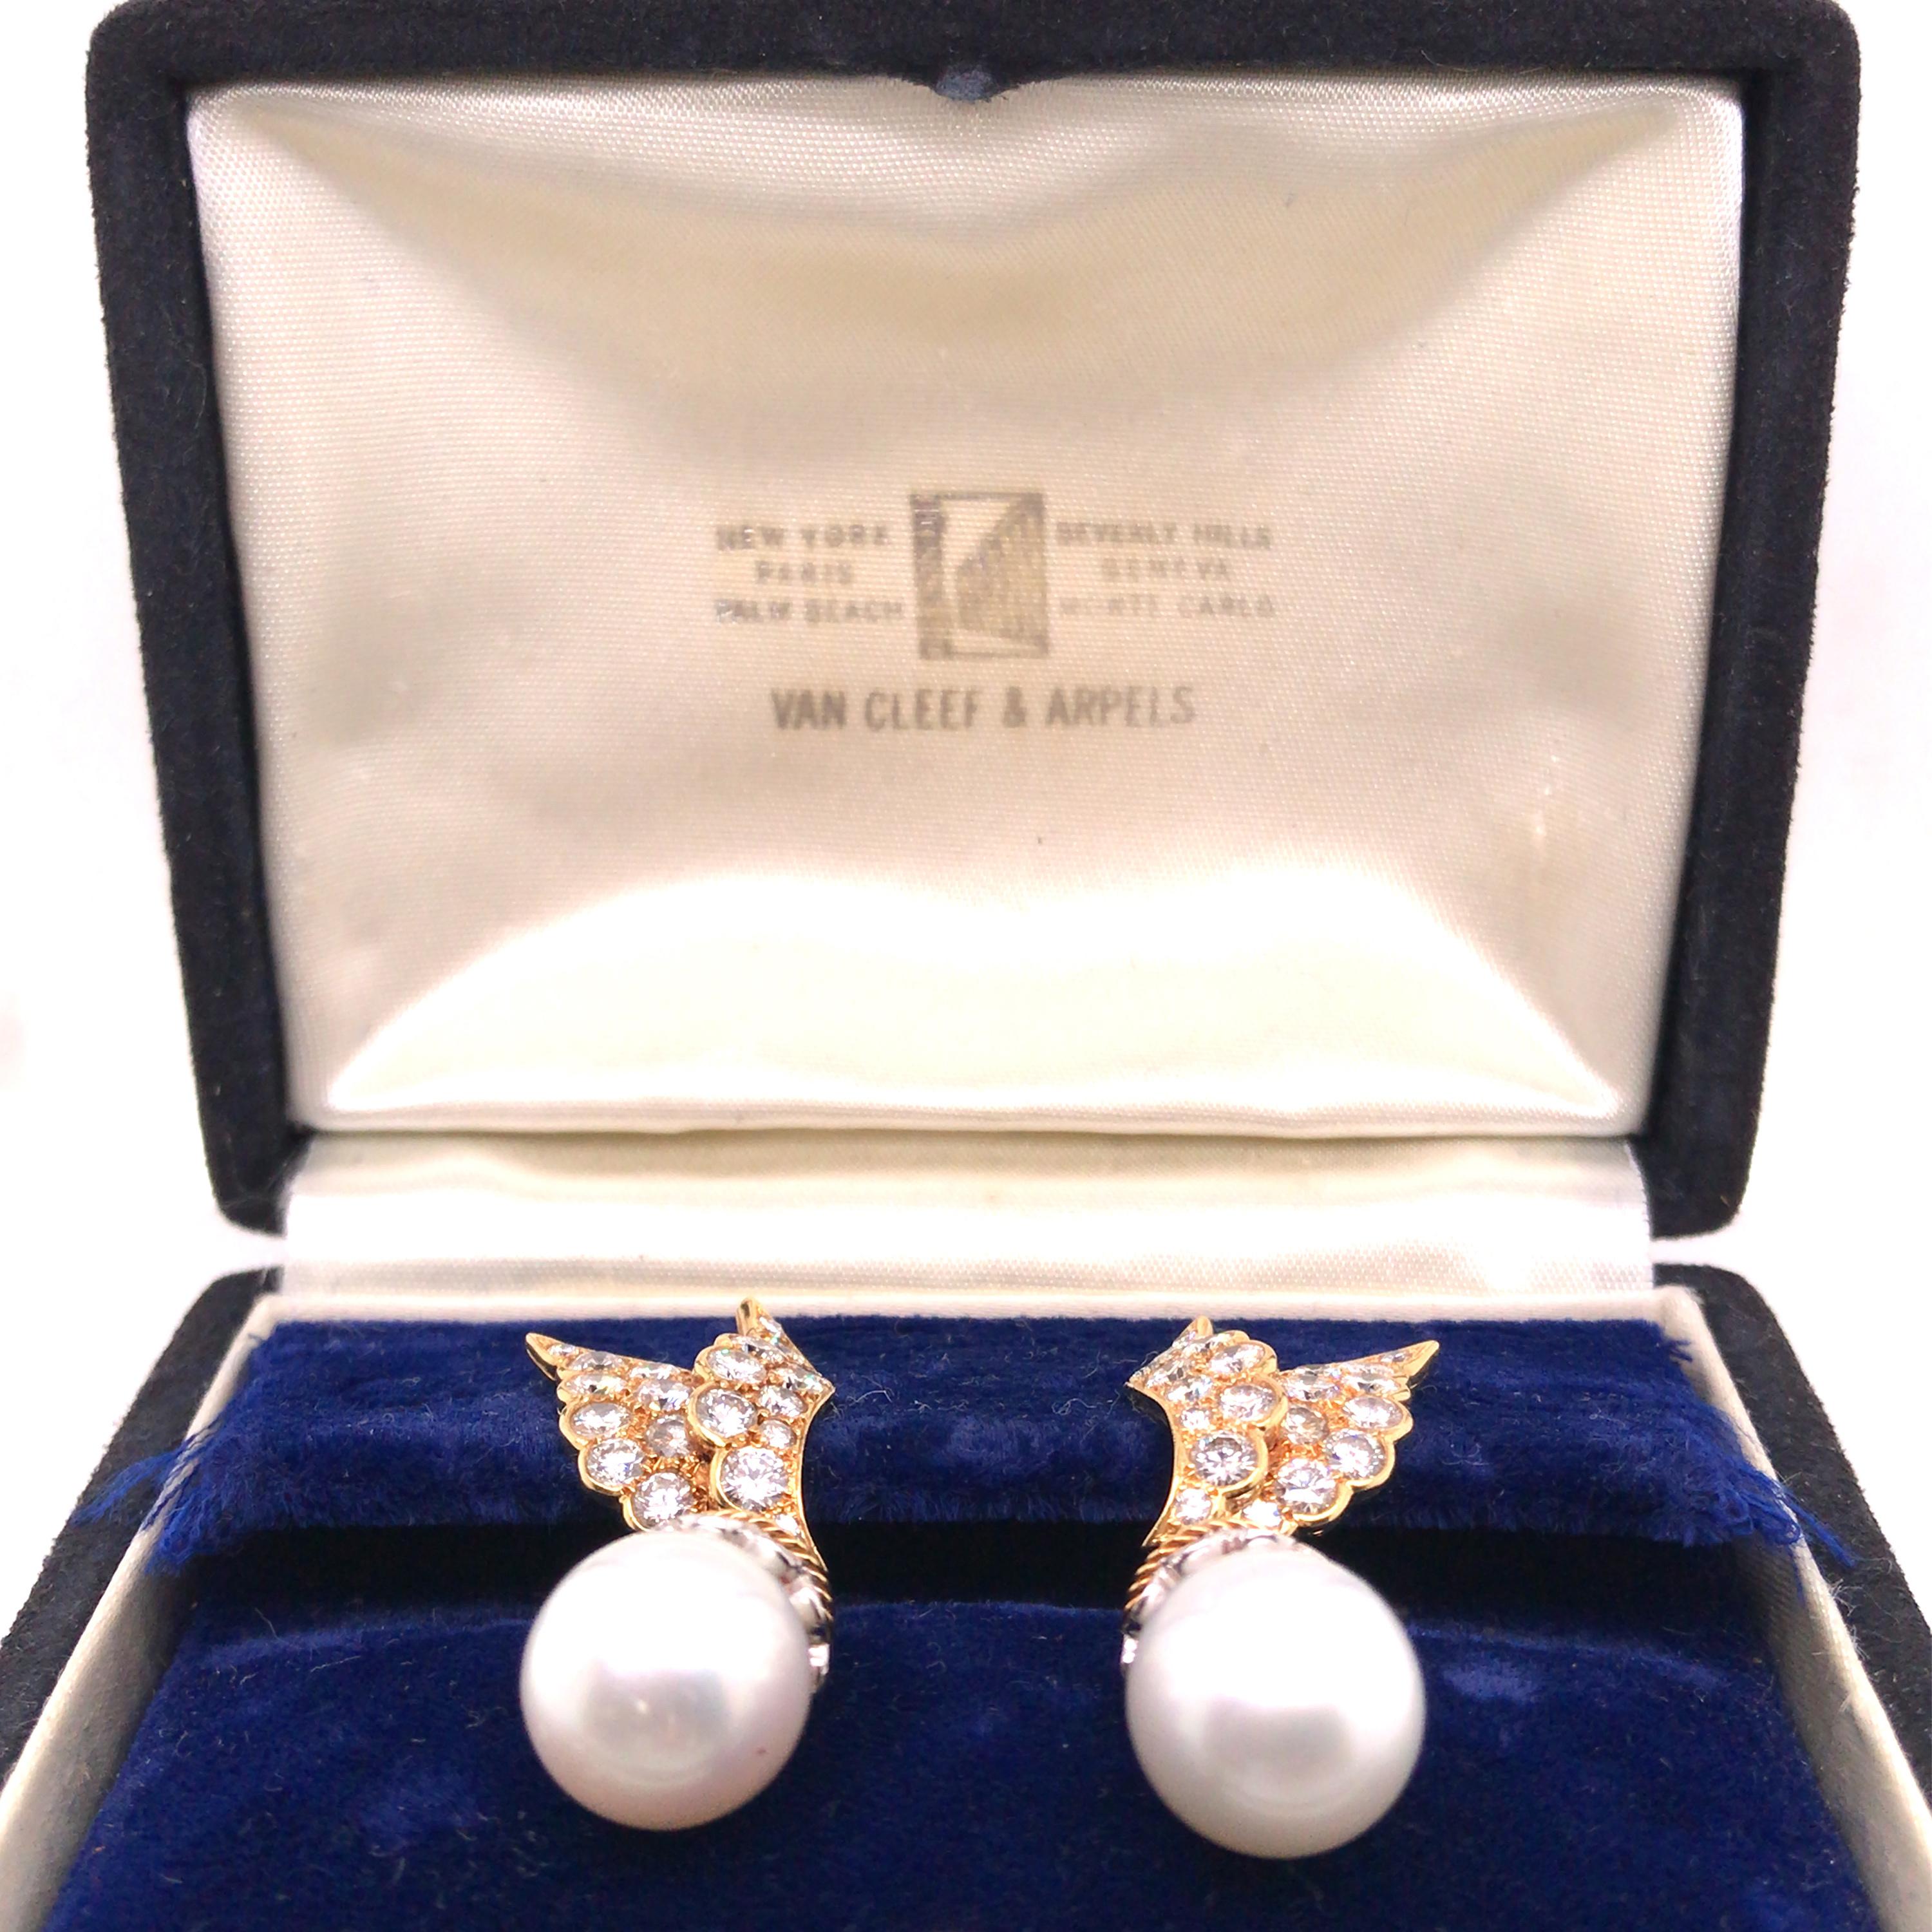 Two pearls approx. 11.4mm, capped by 56 round and single-cut diamonds, topped by 46 round diamonds leaves motif. Diamond total approx. 4.55ct, G-I/VS. Pendants detachable, clip-backs, with signed box. 

Weight: tops 7.5 grams
Stamp: 